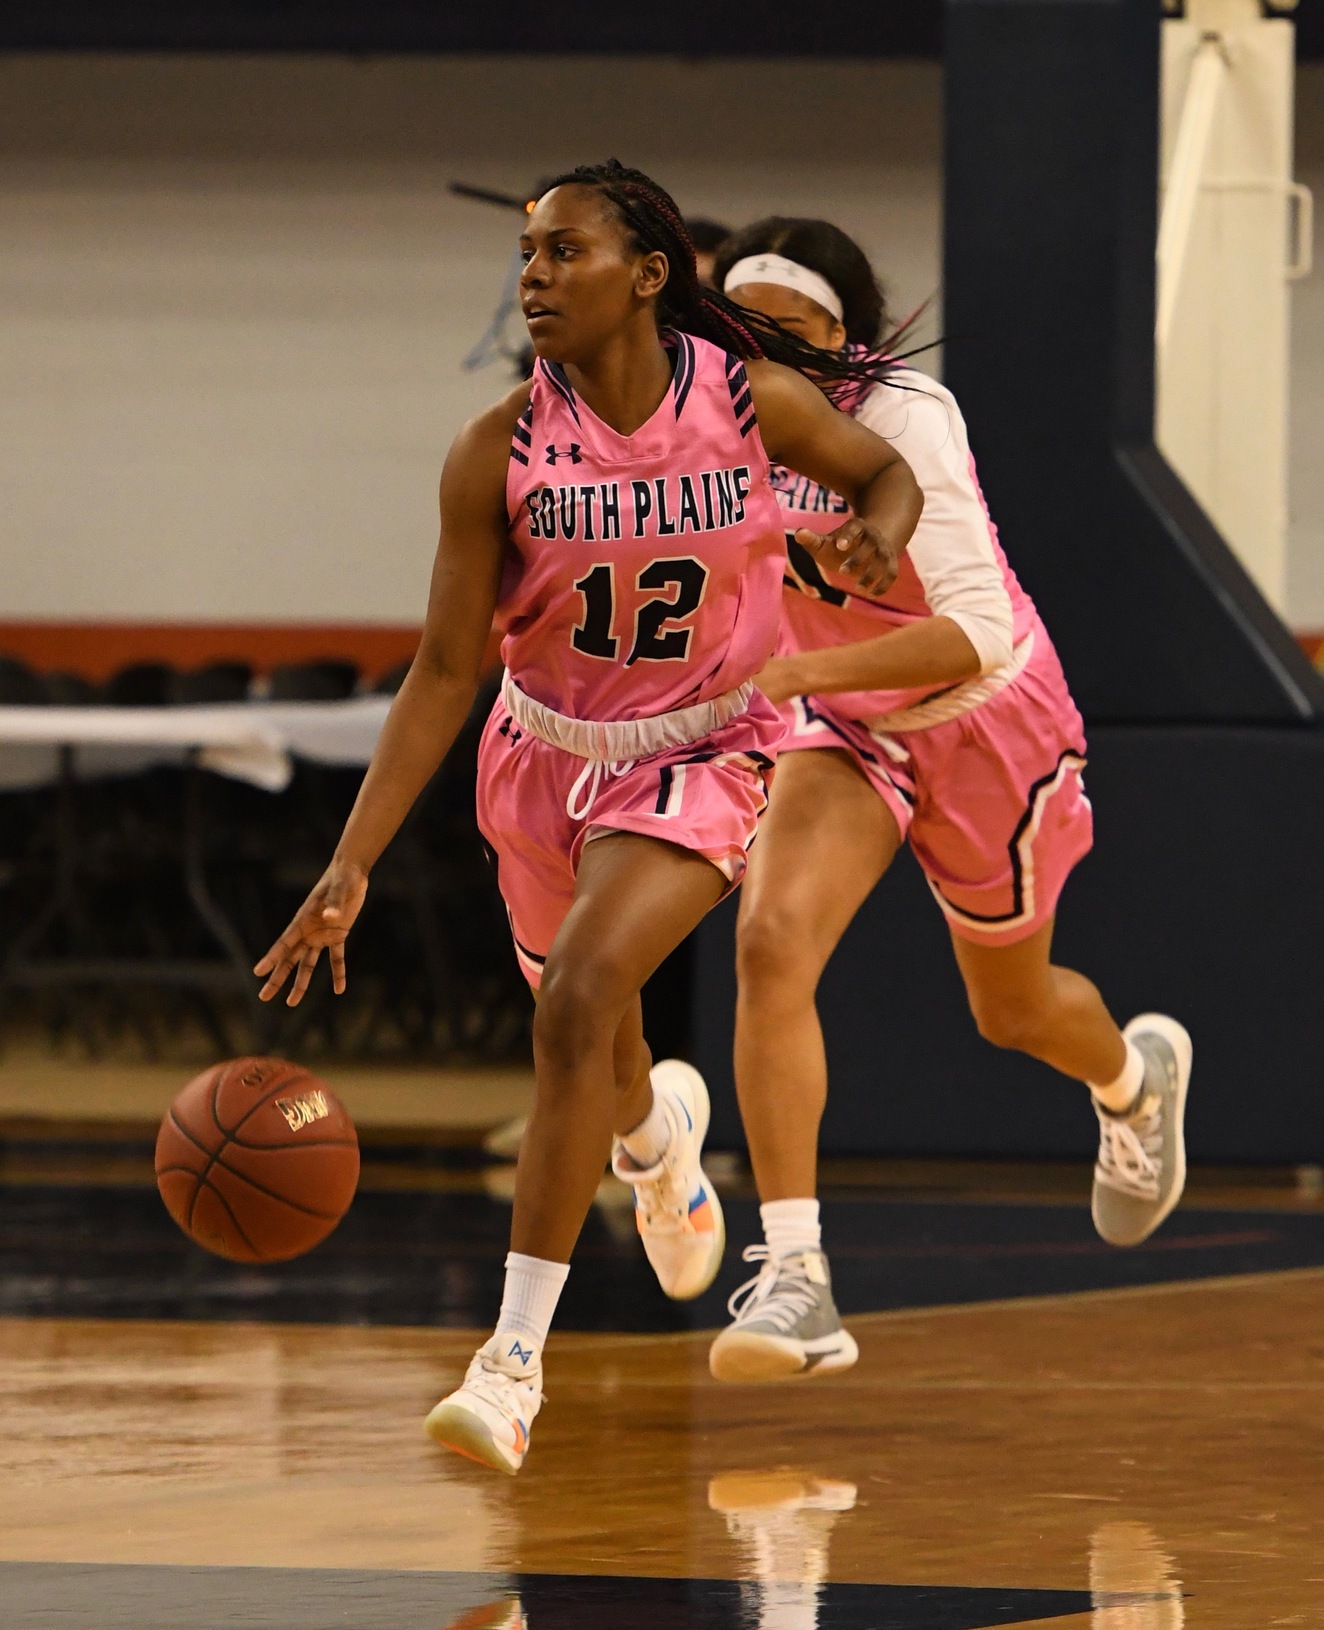 Hunter's double-double leads top-ranked Lady Texans past Western Texas 75-52 Monday